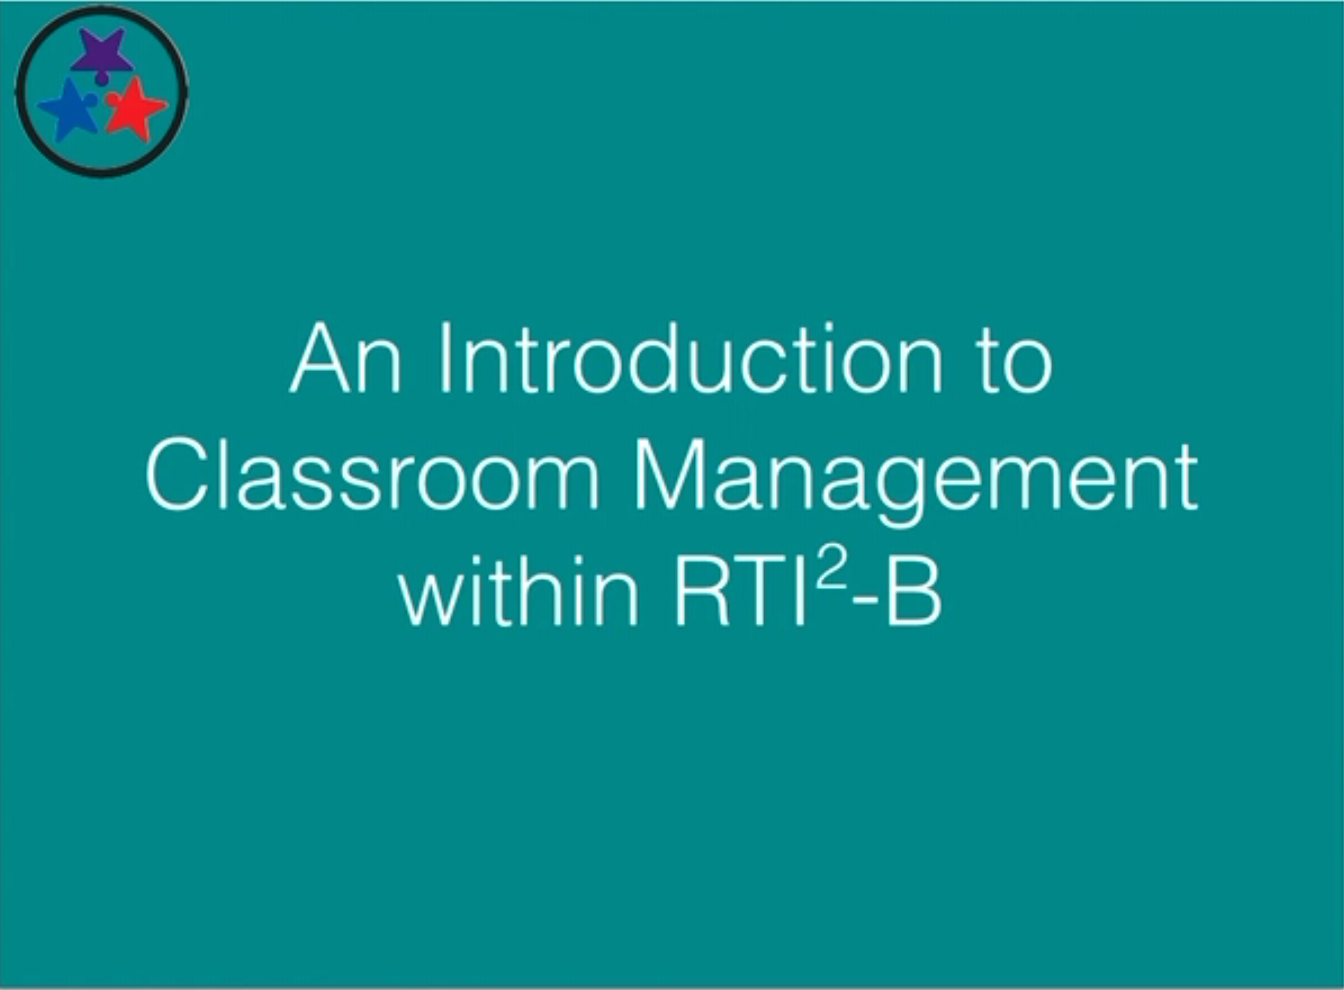 Classroom Management 1 - An Introduction to Classroom Management within RTI2-B